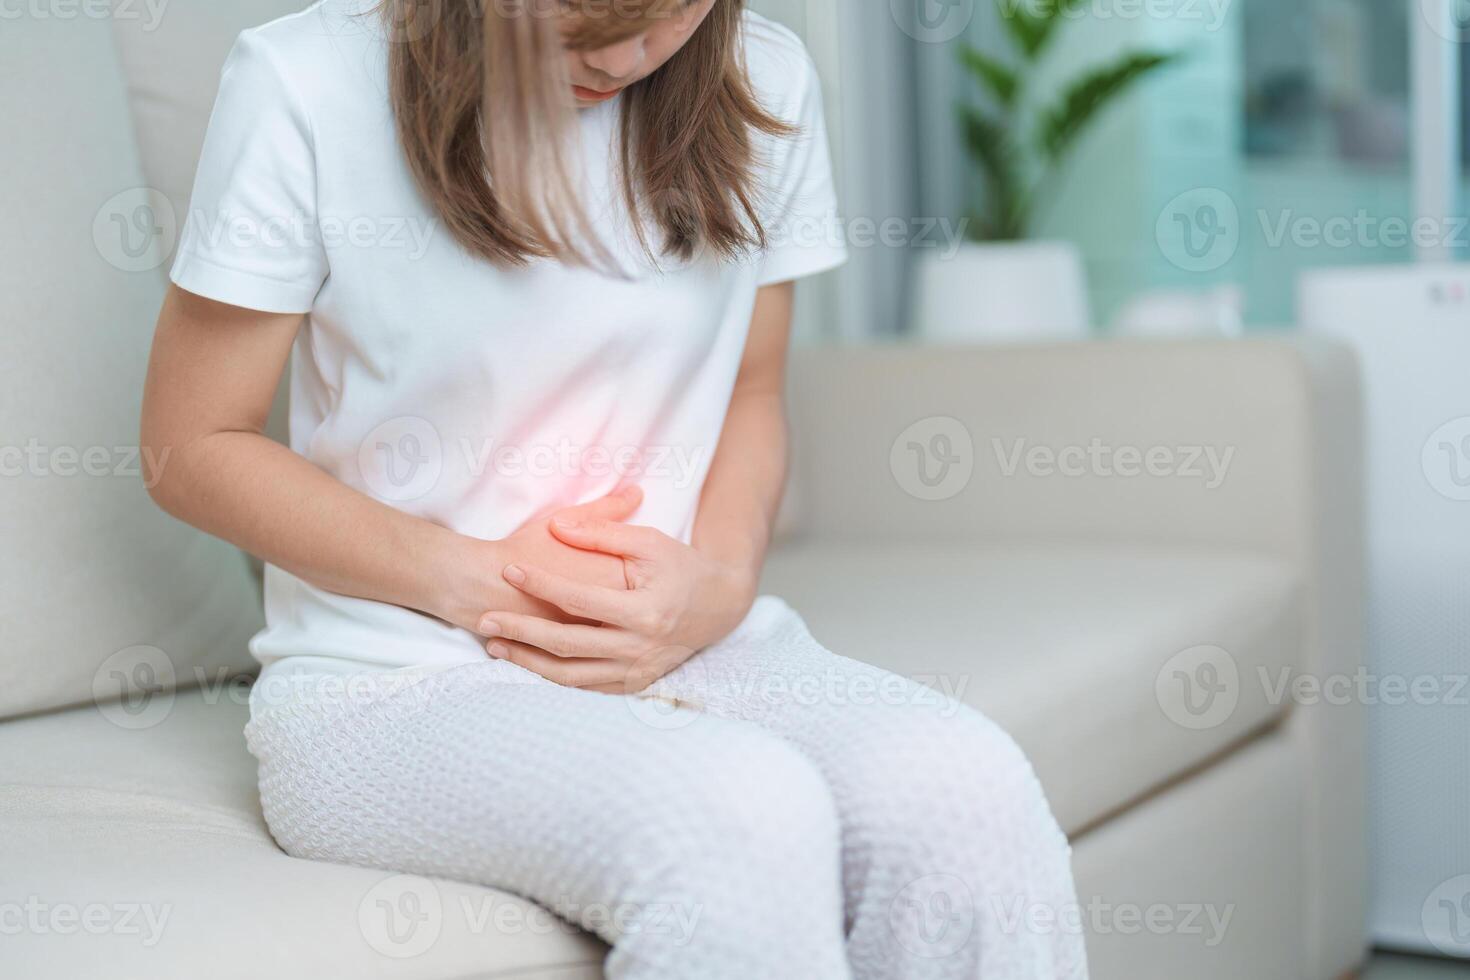 woman having abdomen ache due to Stomach pain, digestion with constipation or Diarrhea from food poisoning, female problem and Endometriosis, Hysterectomy, Stomachache and Menstrual on sofa at home photo